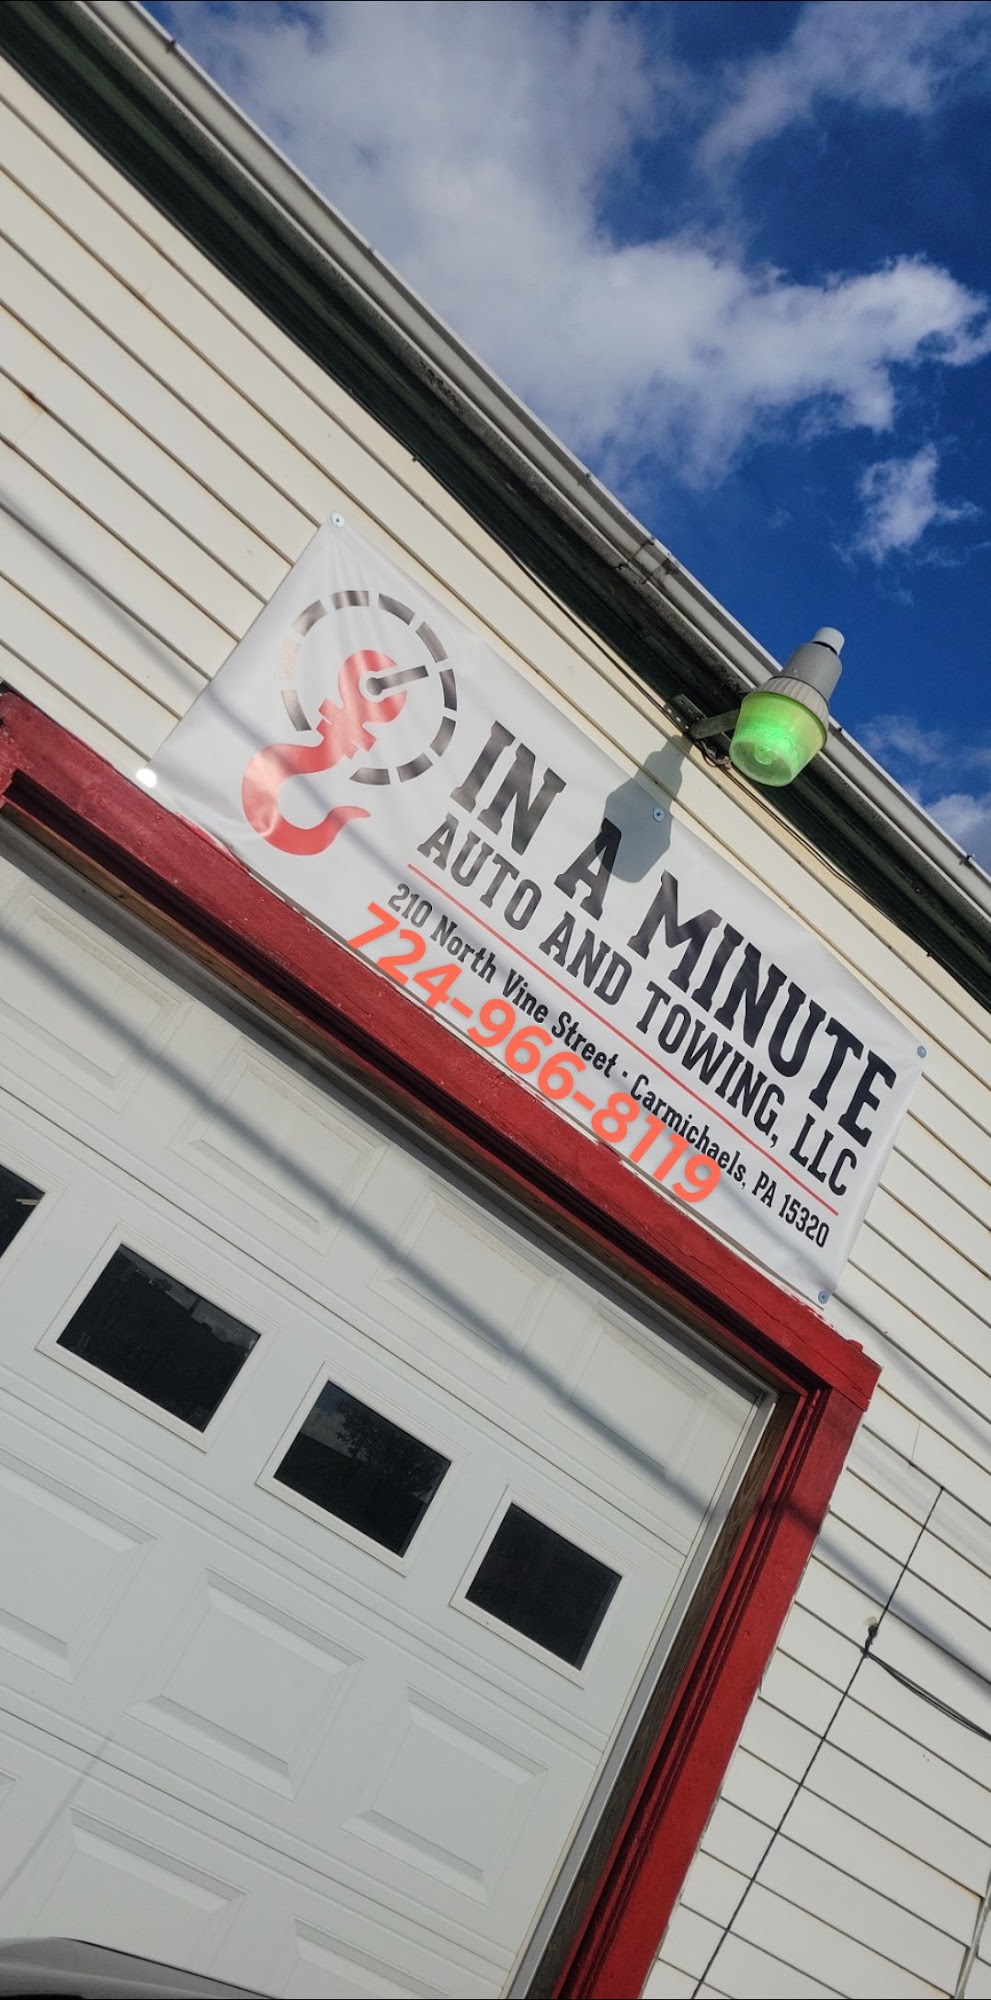 In A Minute Auto & Towing LLC